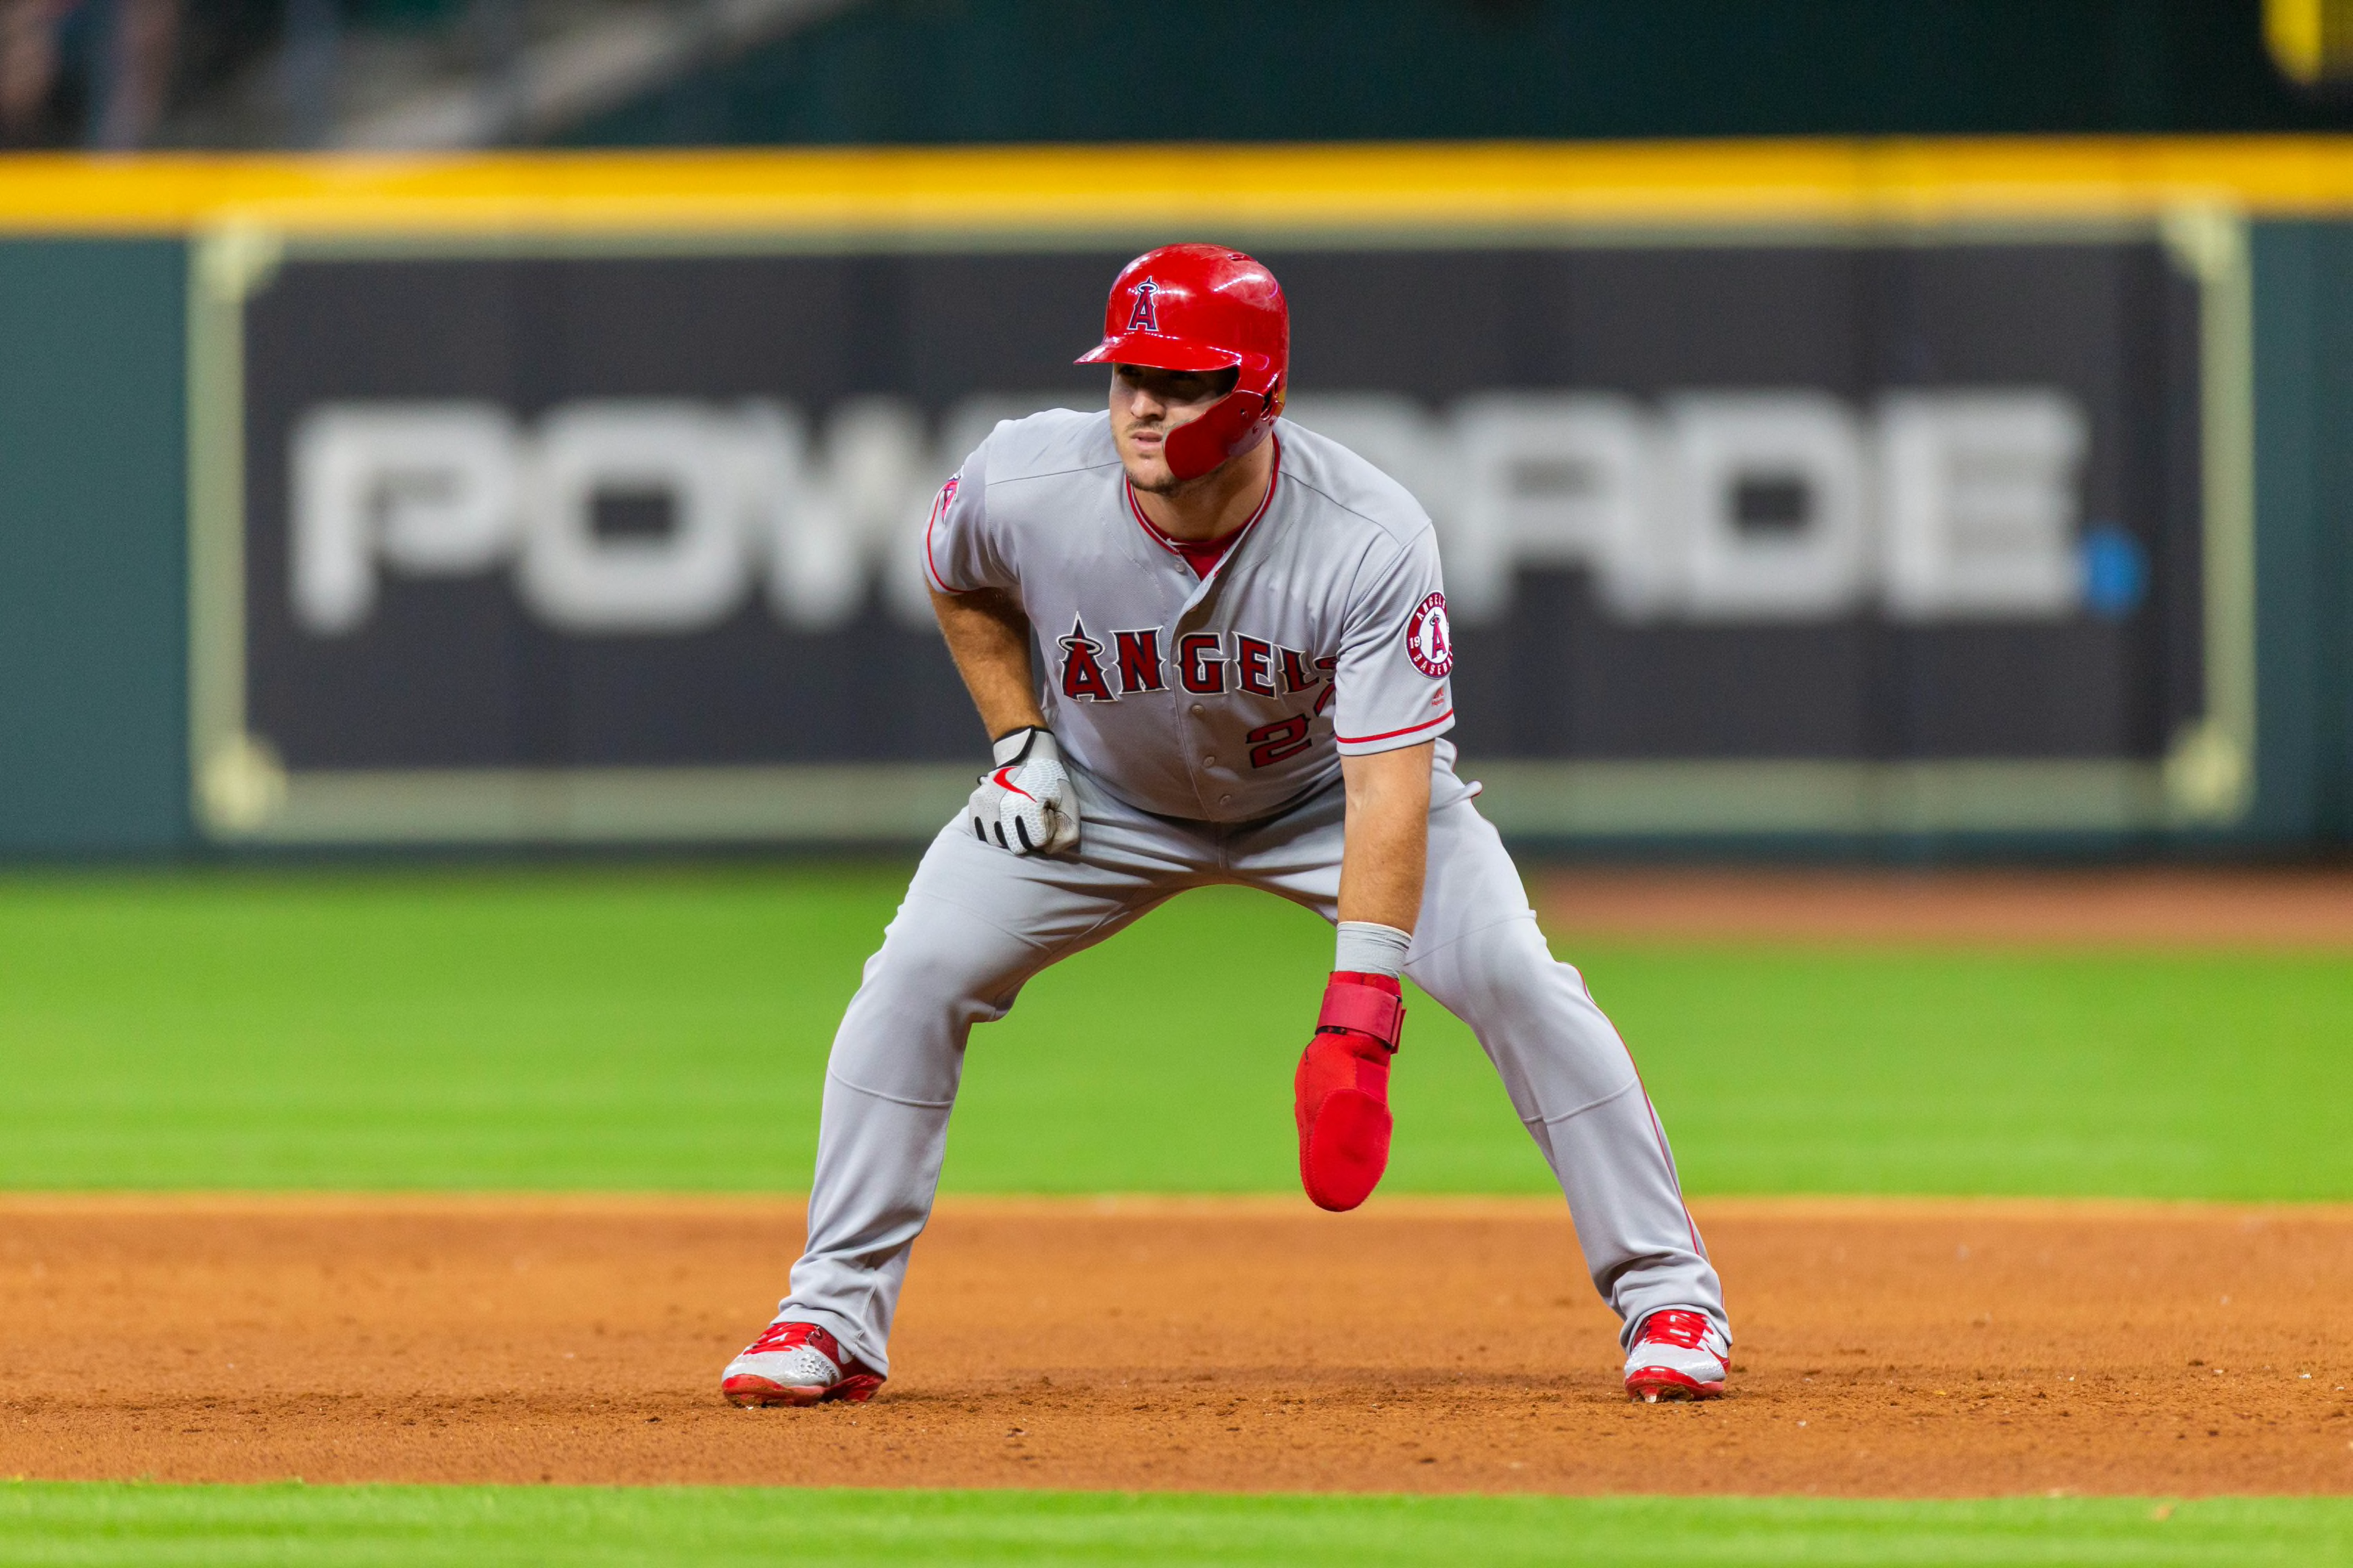 LA Angels' Mike Trout shows off more MVP skills in win – Daily News